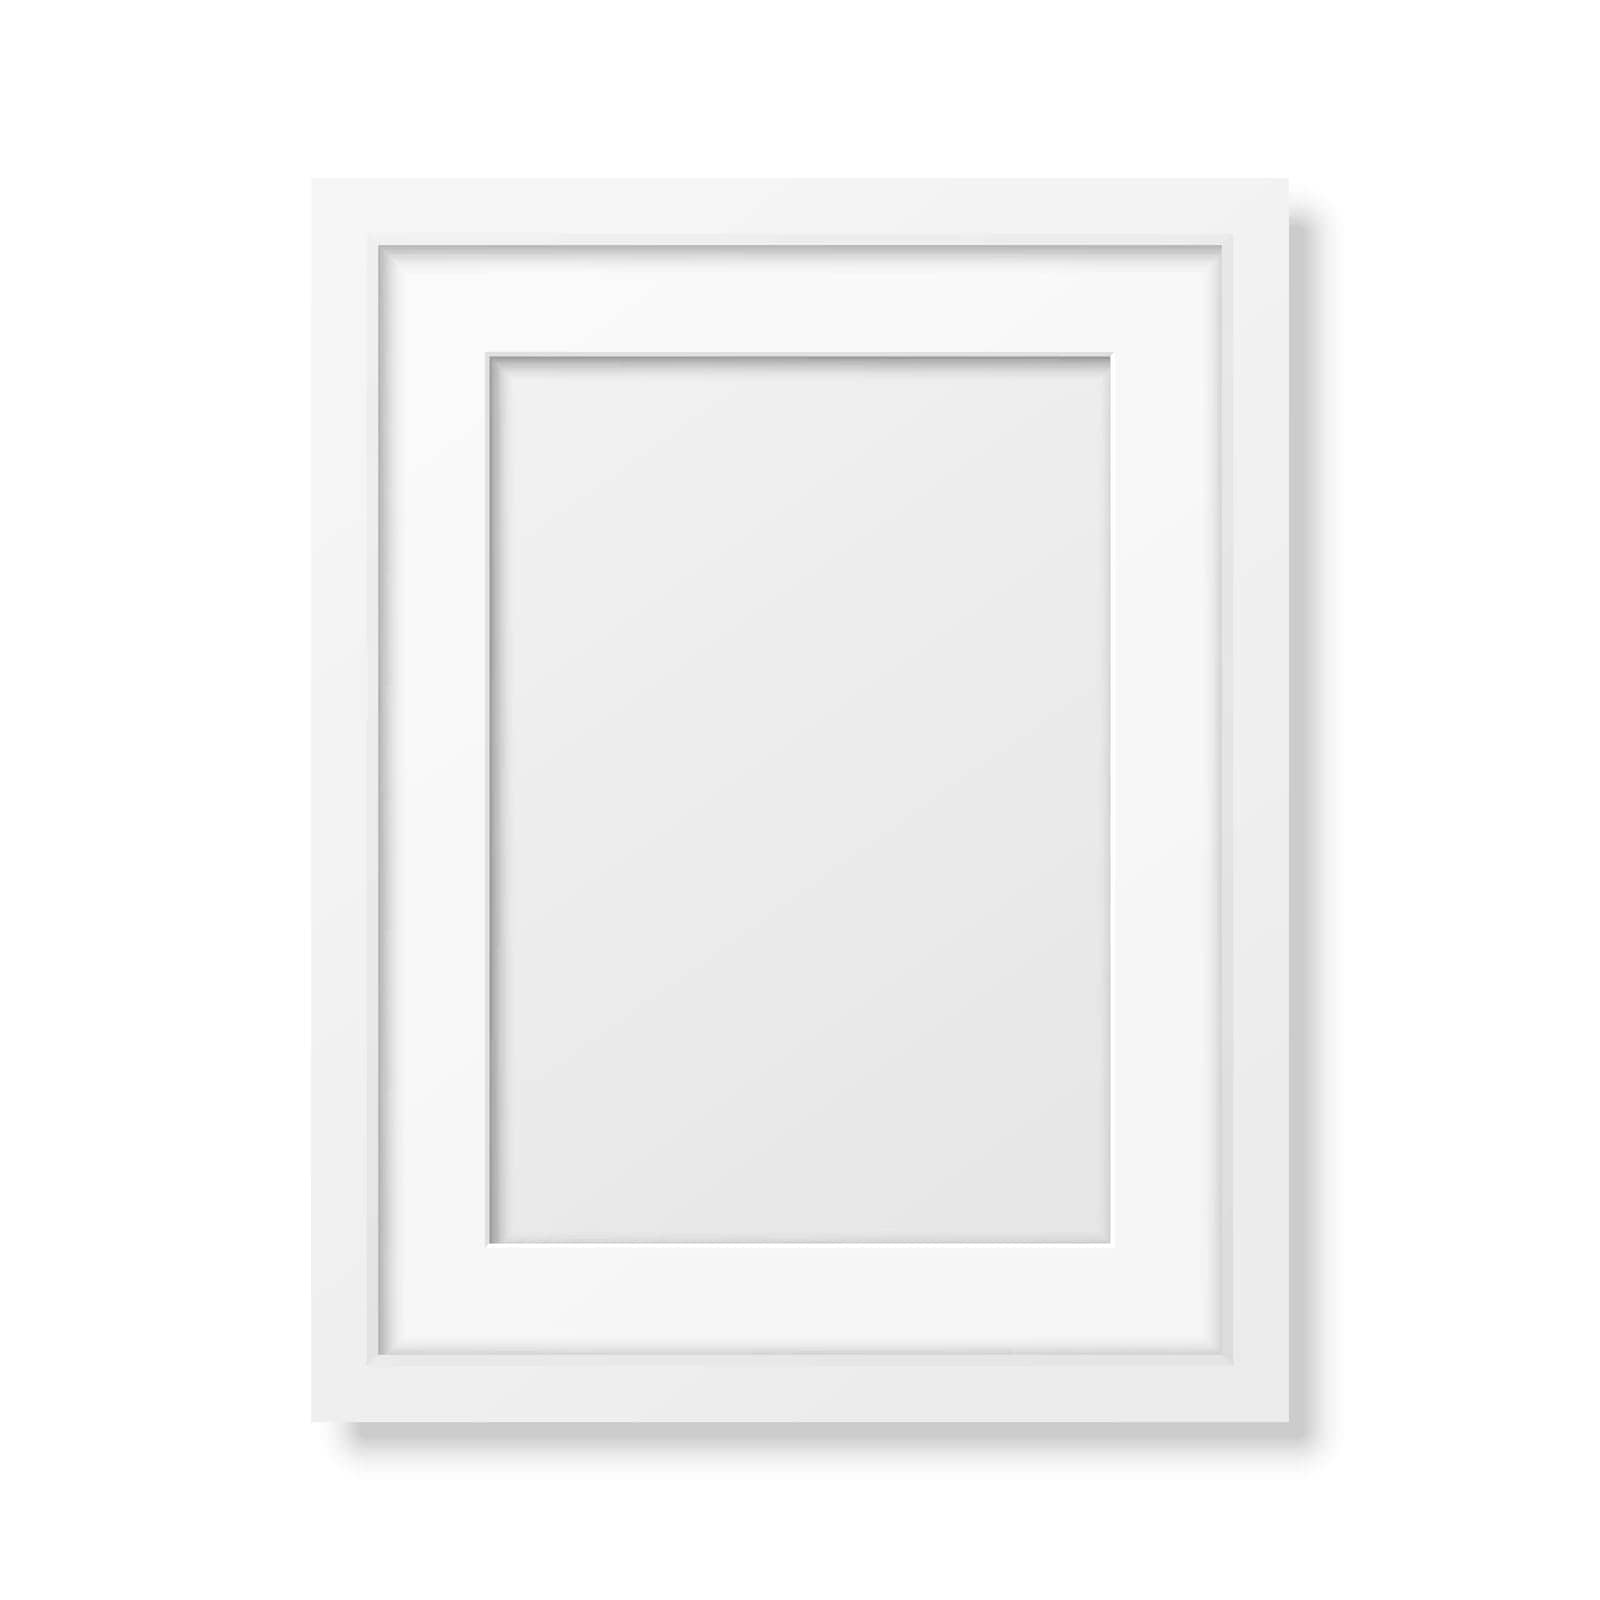 Realistic white frame A4 isolated on white. It can be used for presentations. Vector EPS10 illustration.